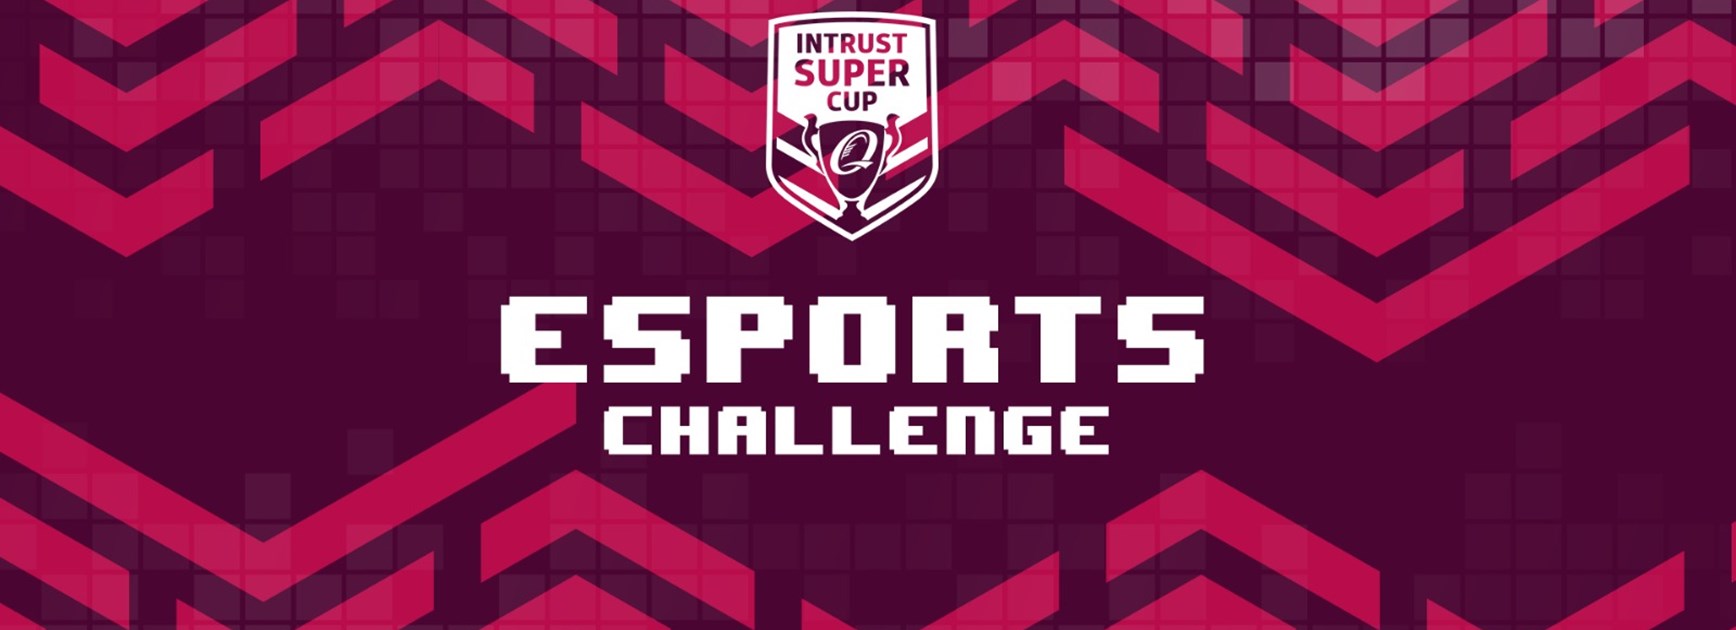 Bears and Falcons undefeated in E-sports Challenge